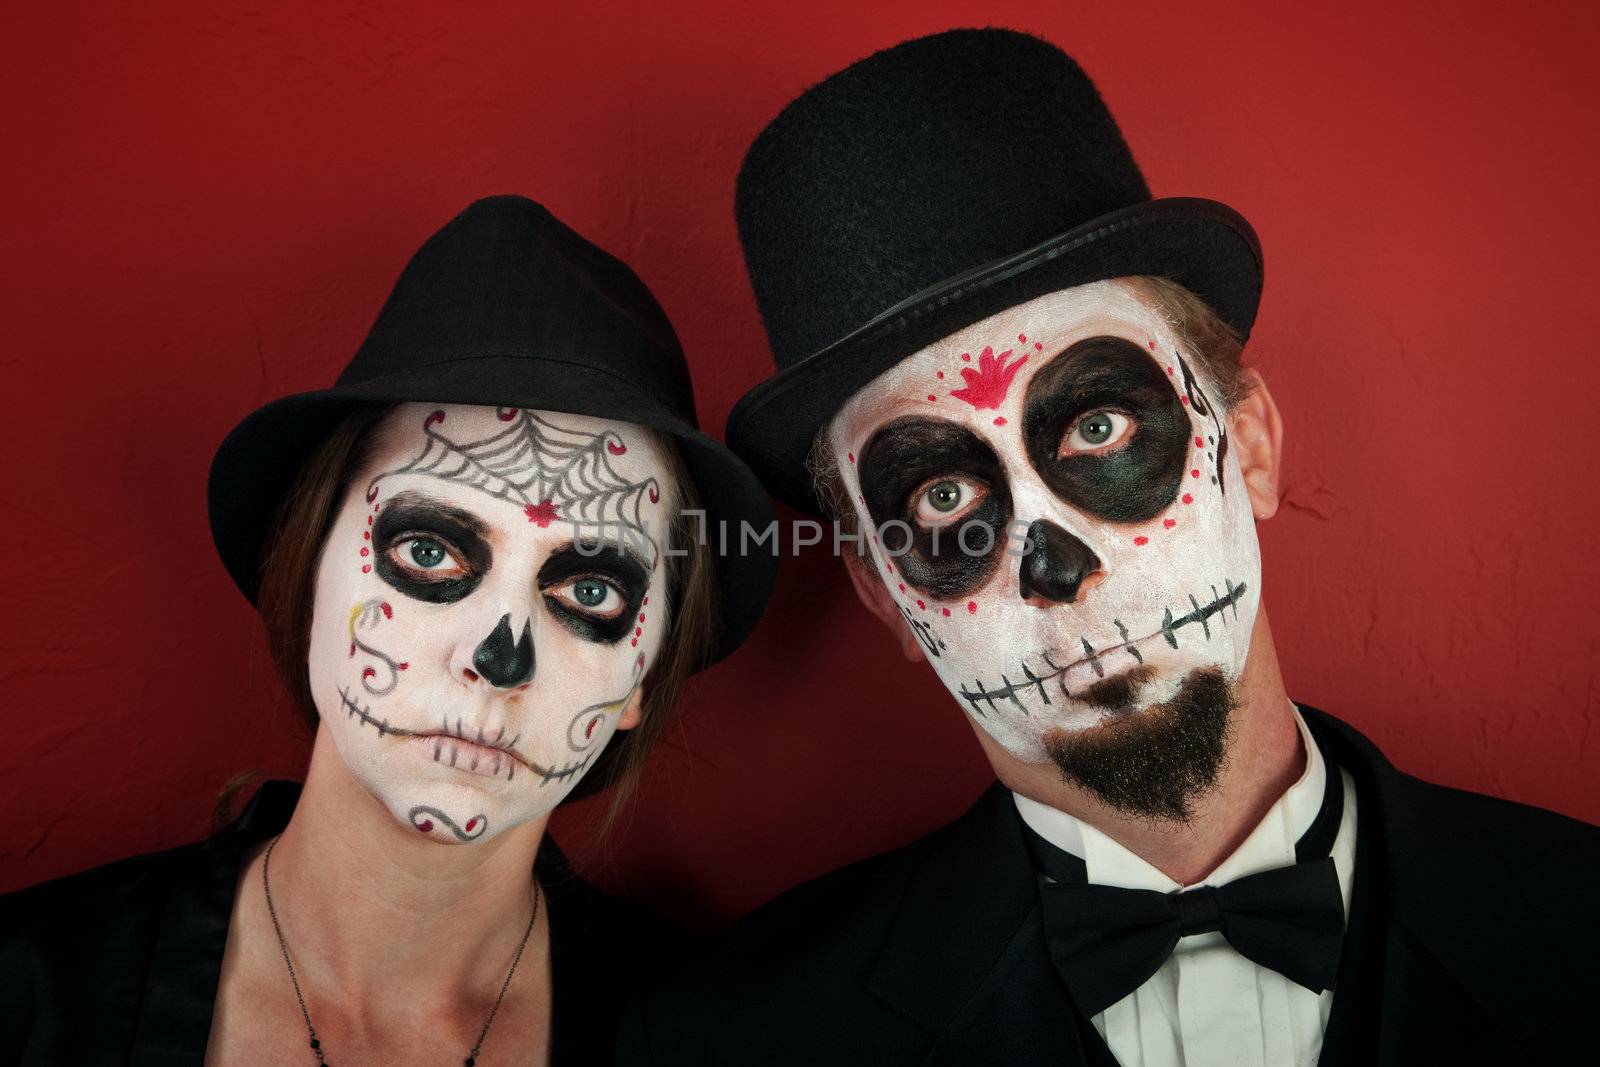 Serious couple in skull and cobweb makeup with hats